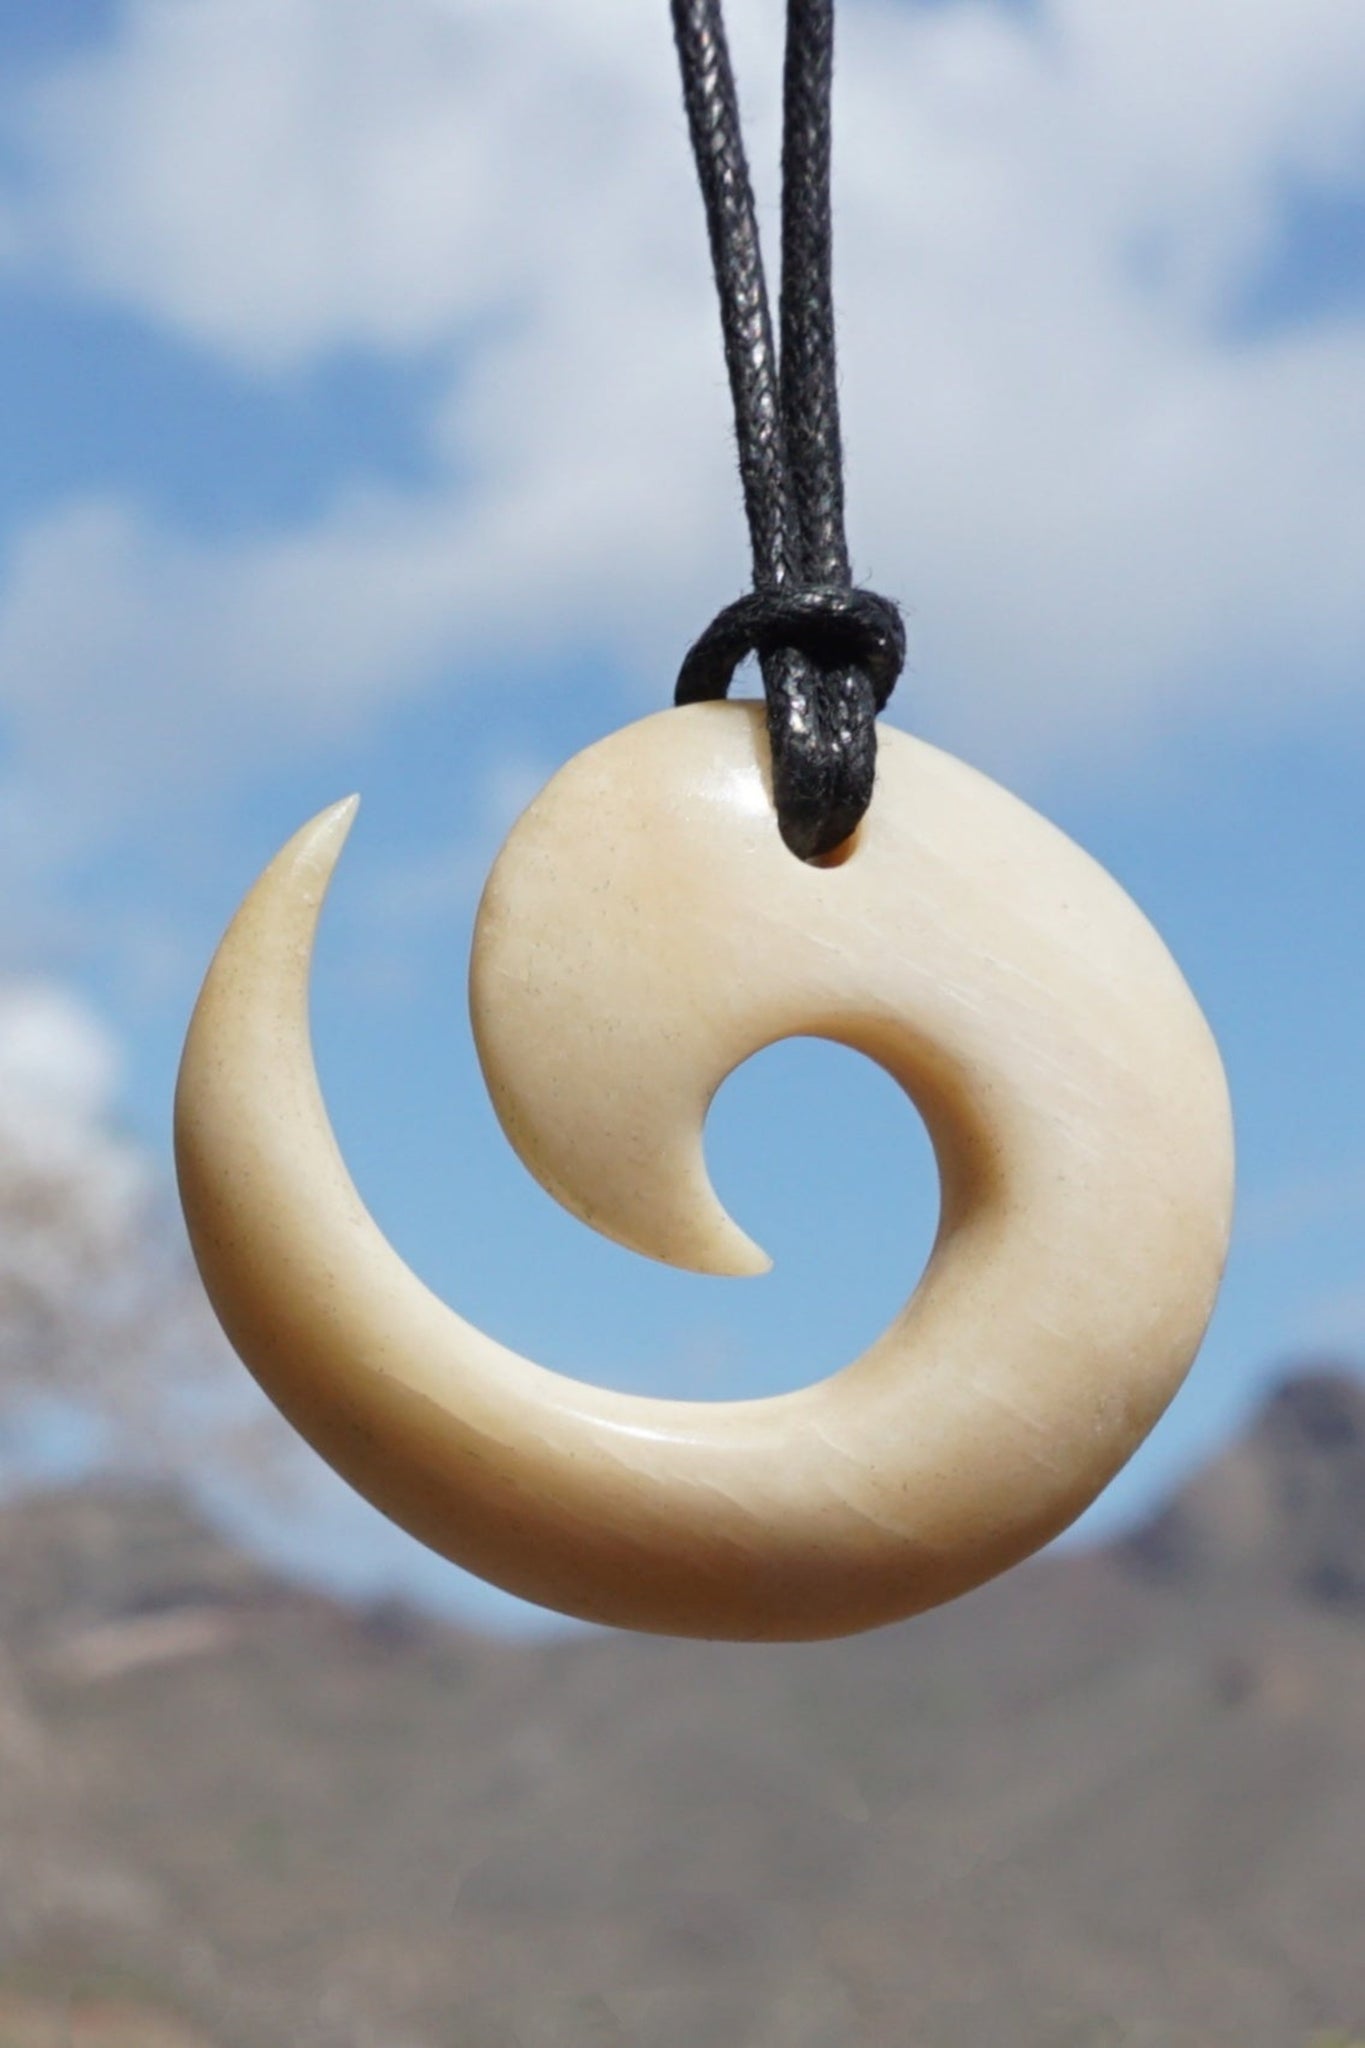 Marquesan spiral necklace carved in bone from Nuku Hiva Island